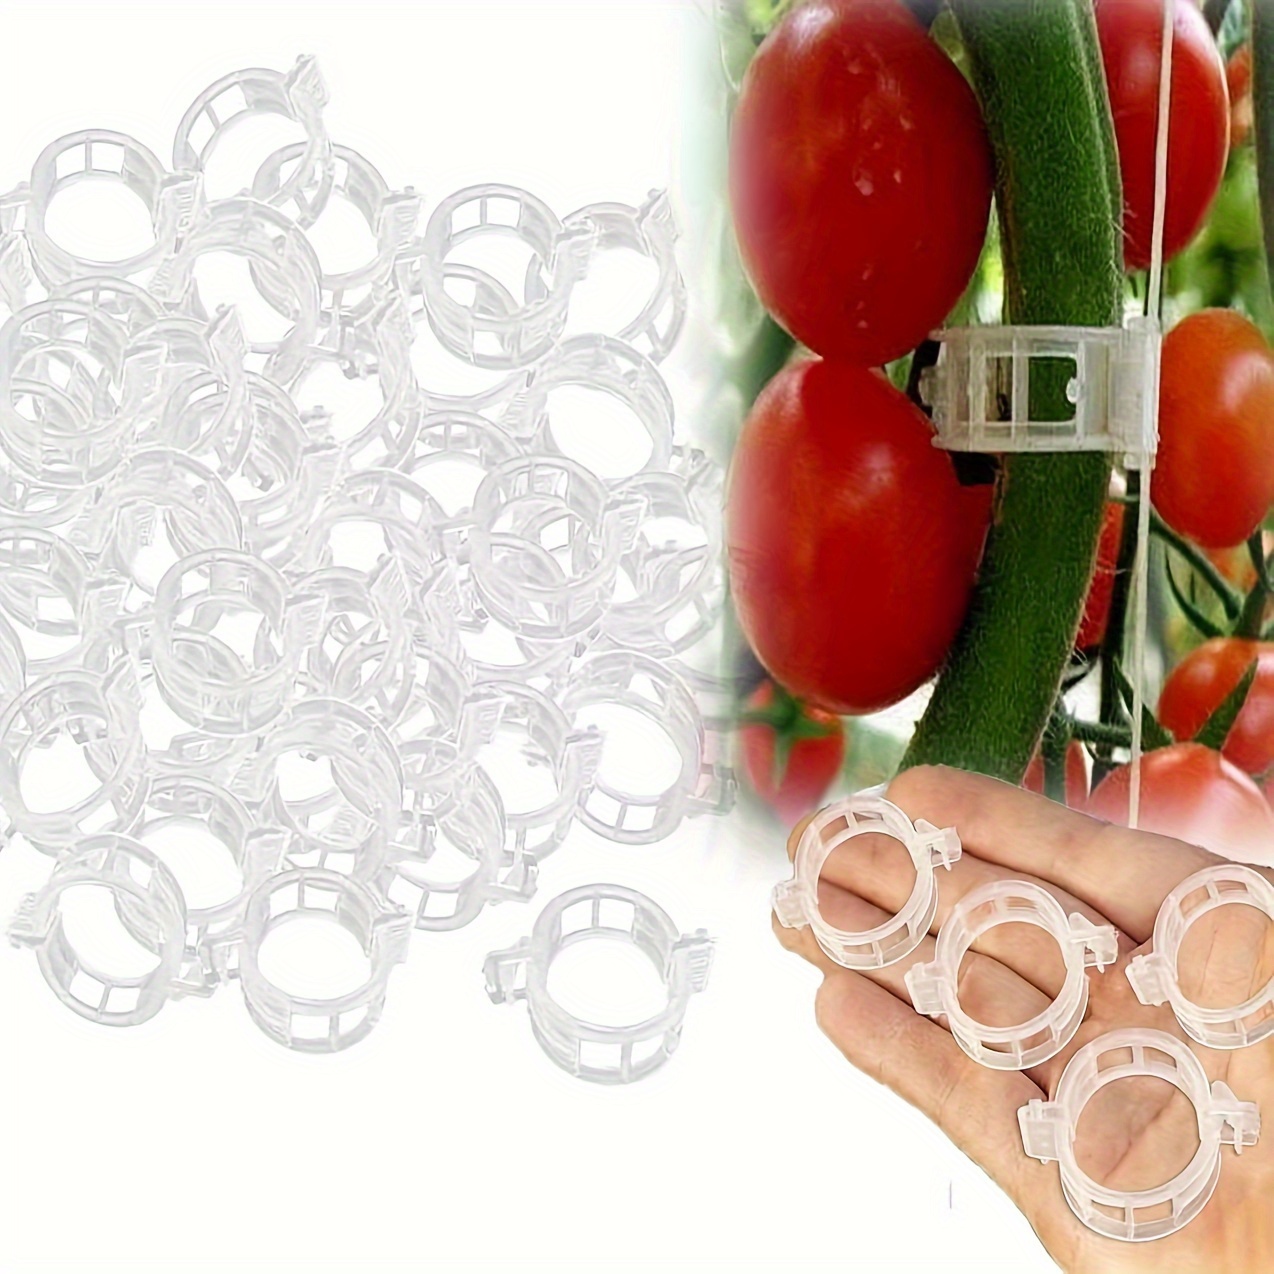 

100pcs Garden Plant Support Clips, Plastic Round Shaped Plant Stand, Checkered Tomato Vine & Seedling Climbing Buckles, Lightweight Hanging Fixing Clips For Indoor And Outdoor Garden Use